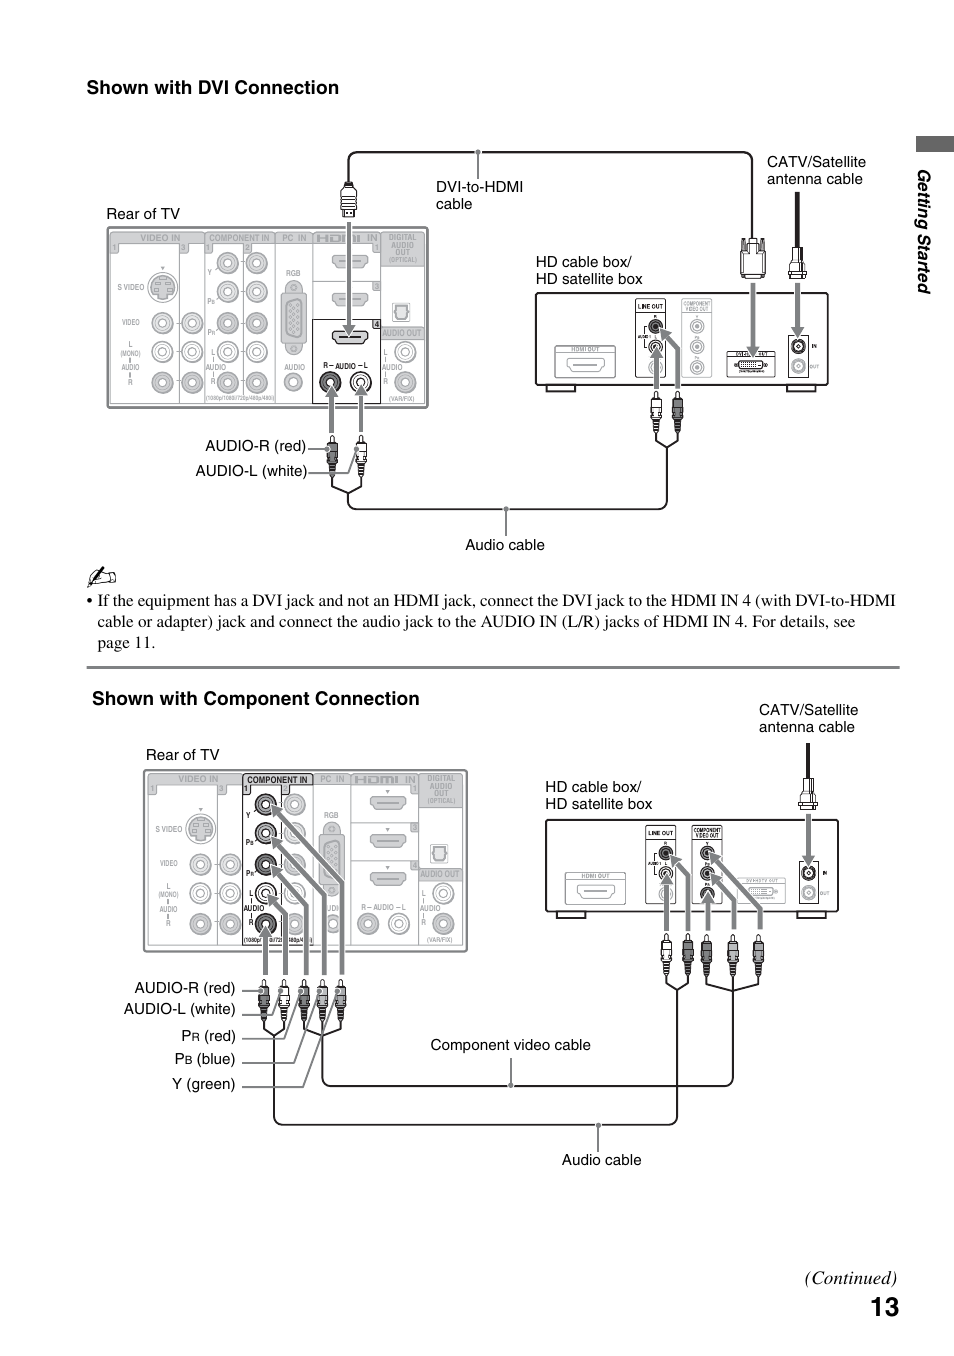 Shown with dvi connection, Shown with component connection (continued), Getting started | Red) audio cable | Sony KDL-52XBR7 User Manual | Page 13 / 60